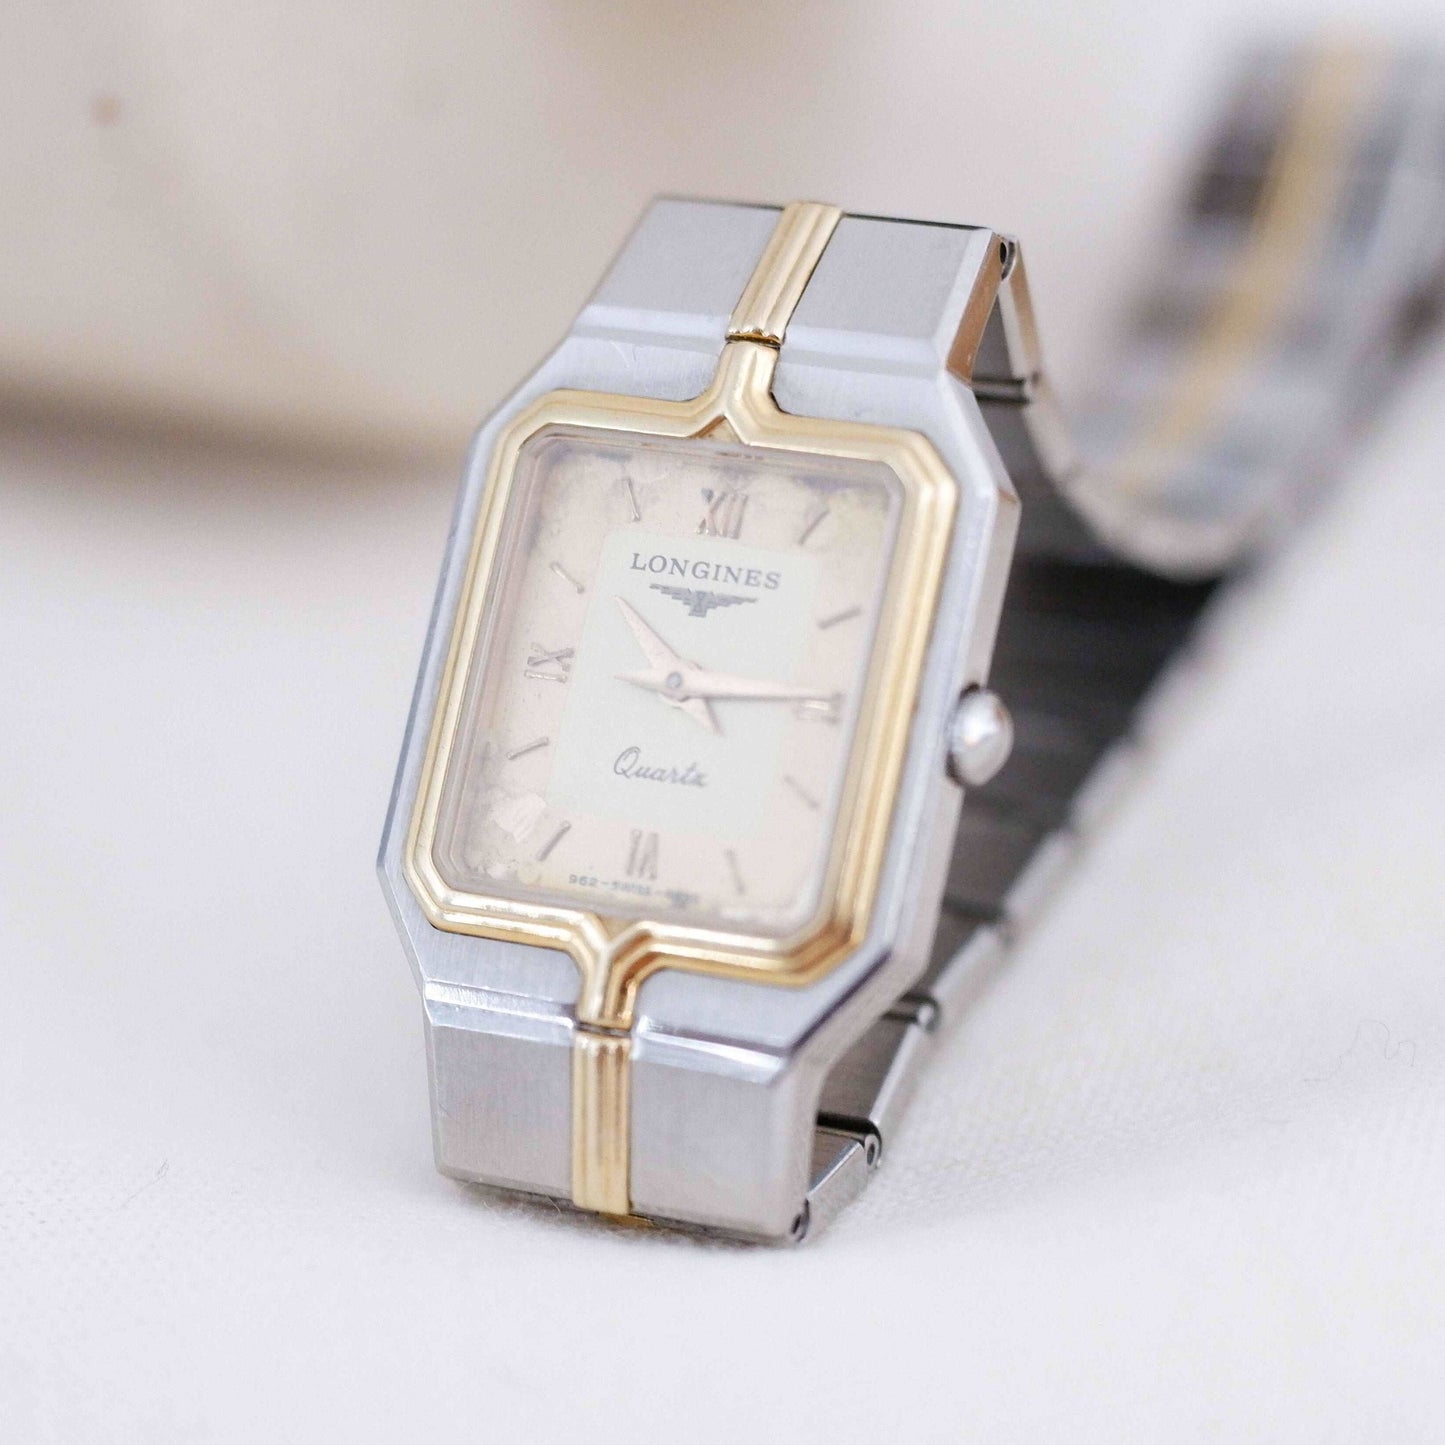 Longines Flagship Vintage Ladies Watch: 90s Golden Two-Tone Classic, Slight Right Side